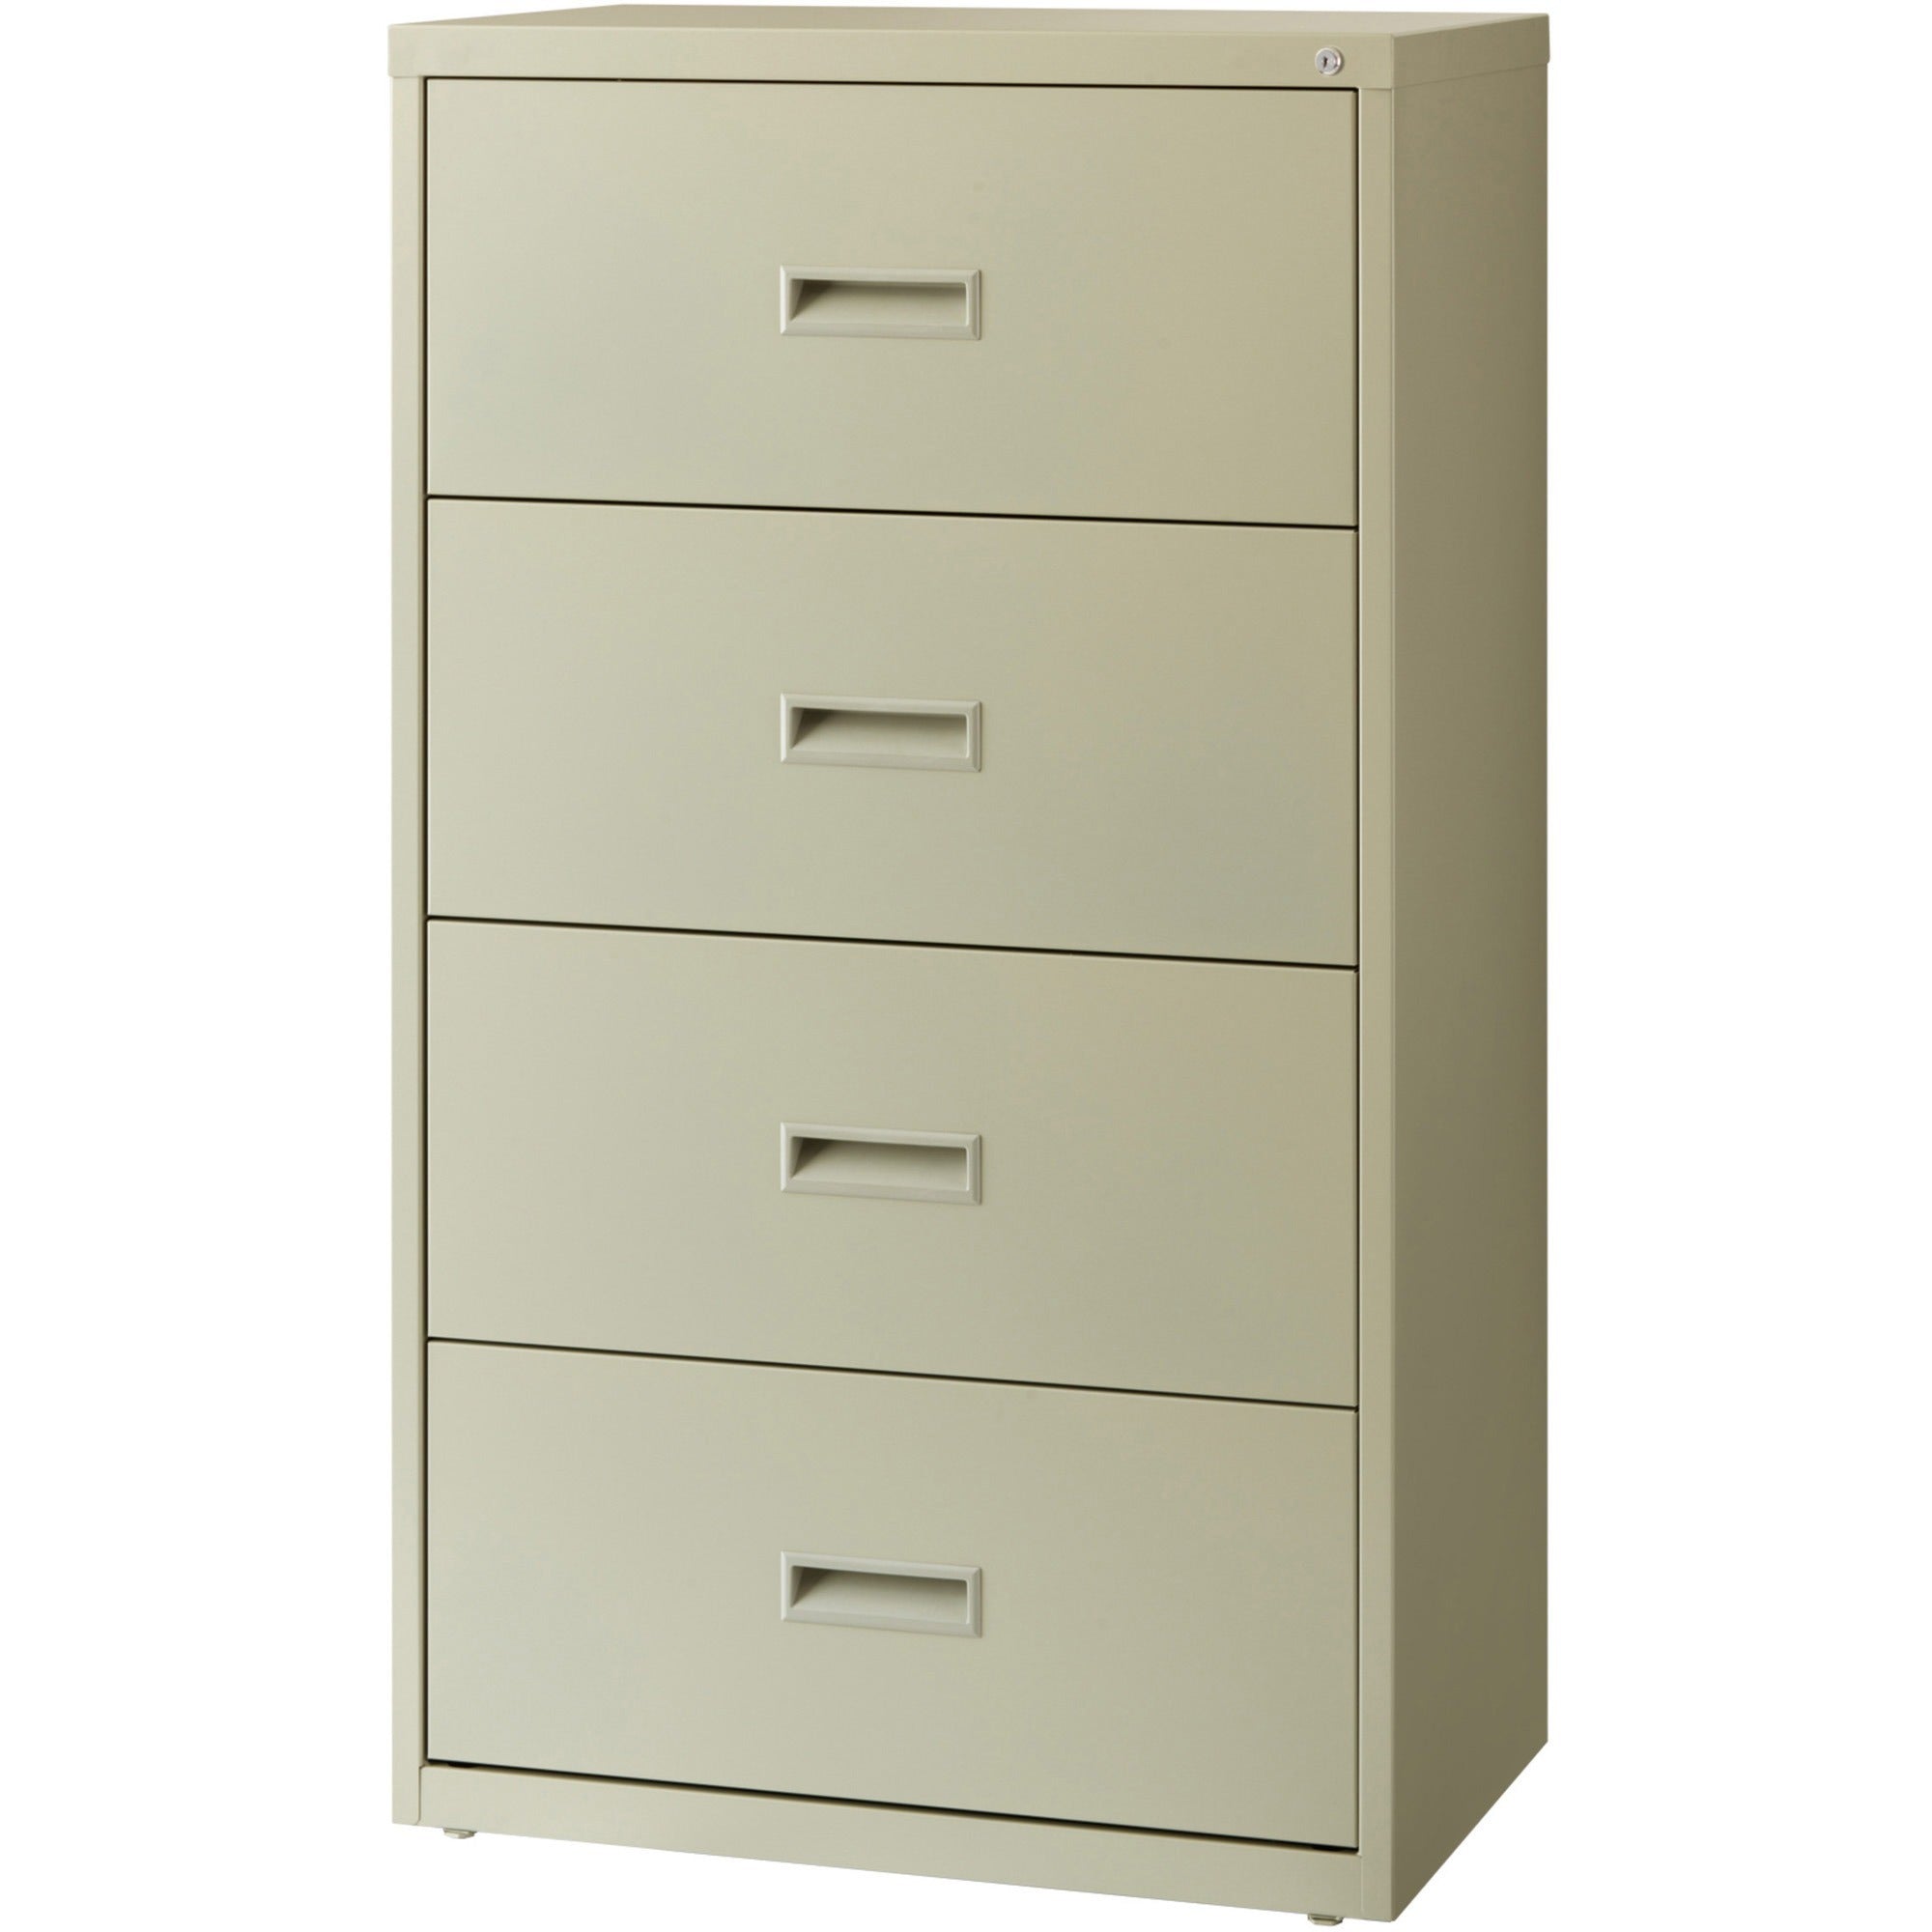 Lorell Value Lateral File - 2-Drawer - 30" x 18.6" x 52.5" - 4 x Drawer(s) for File - A4, Legal, Letter - Interlocking, Adjustable Glide, Ball-bearing Suspension, Label Holder - Putty - Steel - Recycled - 